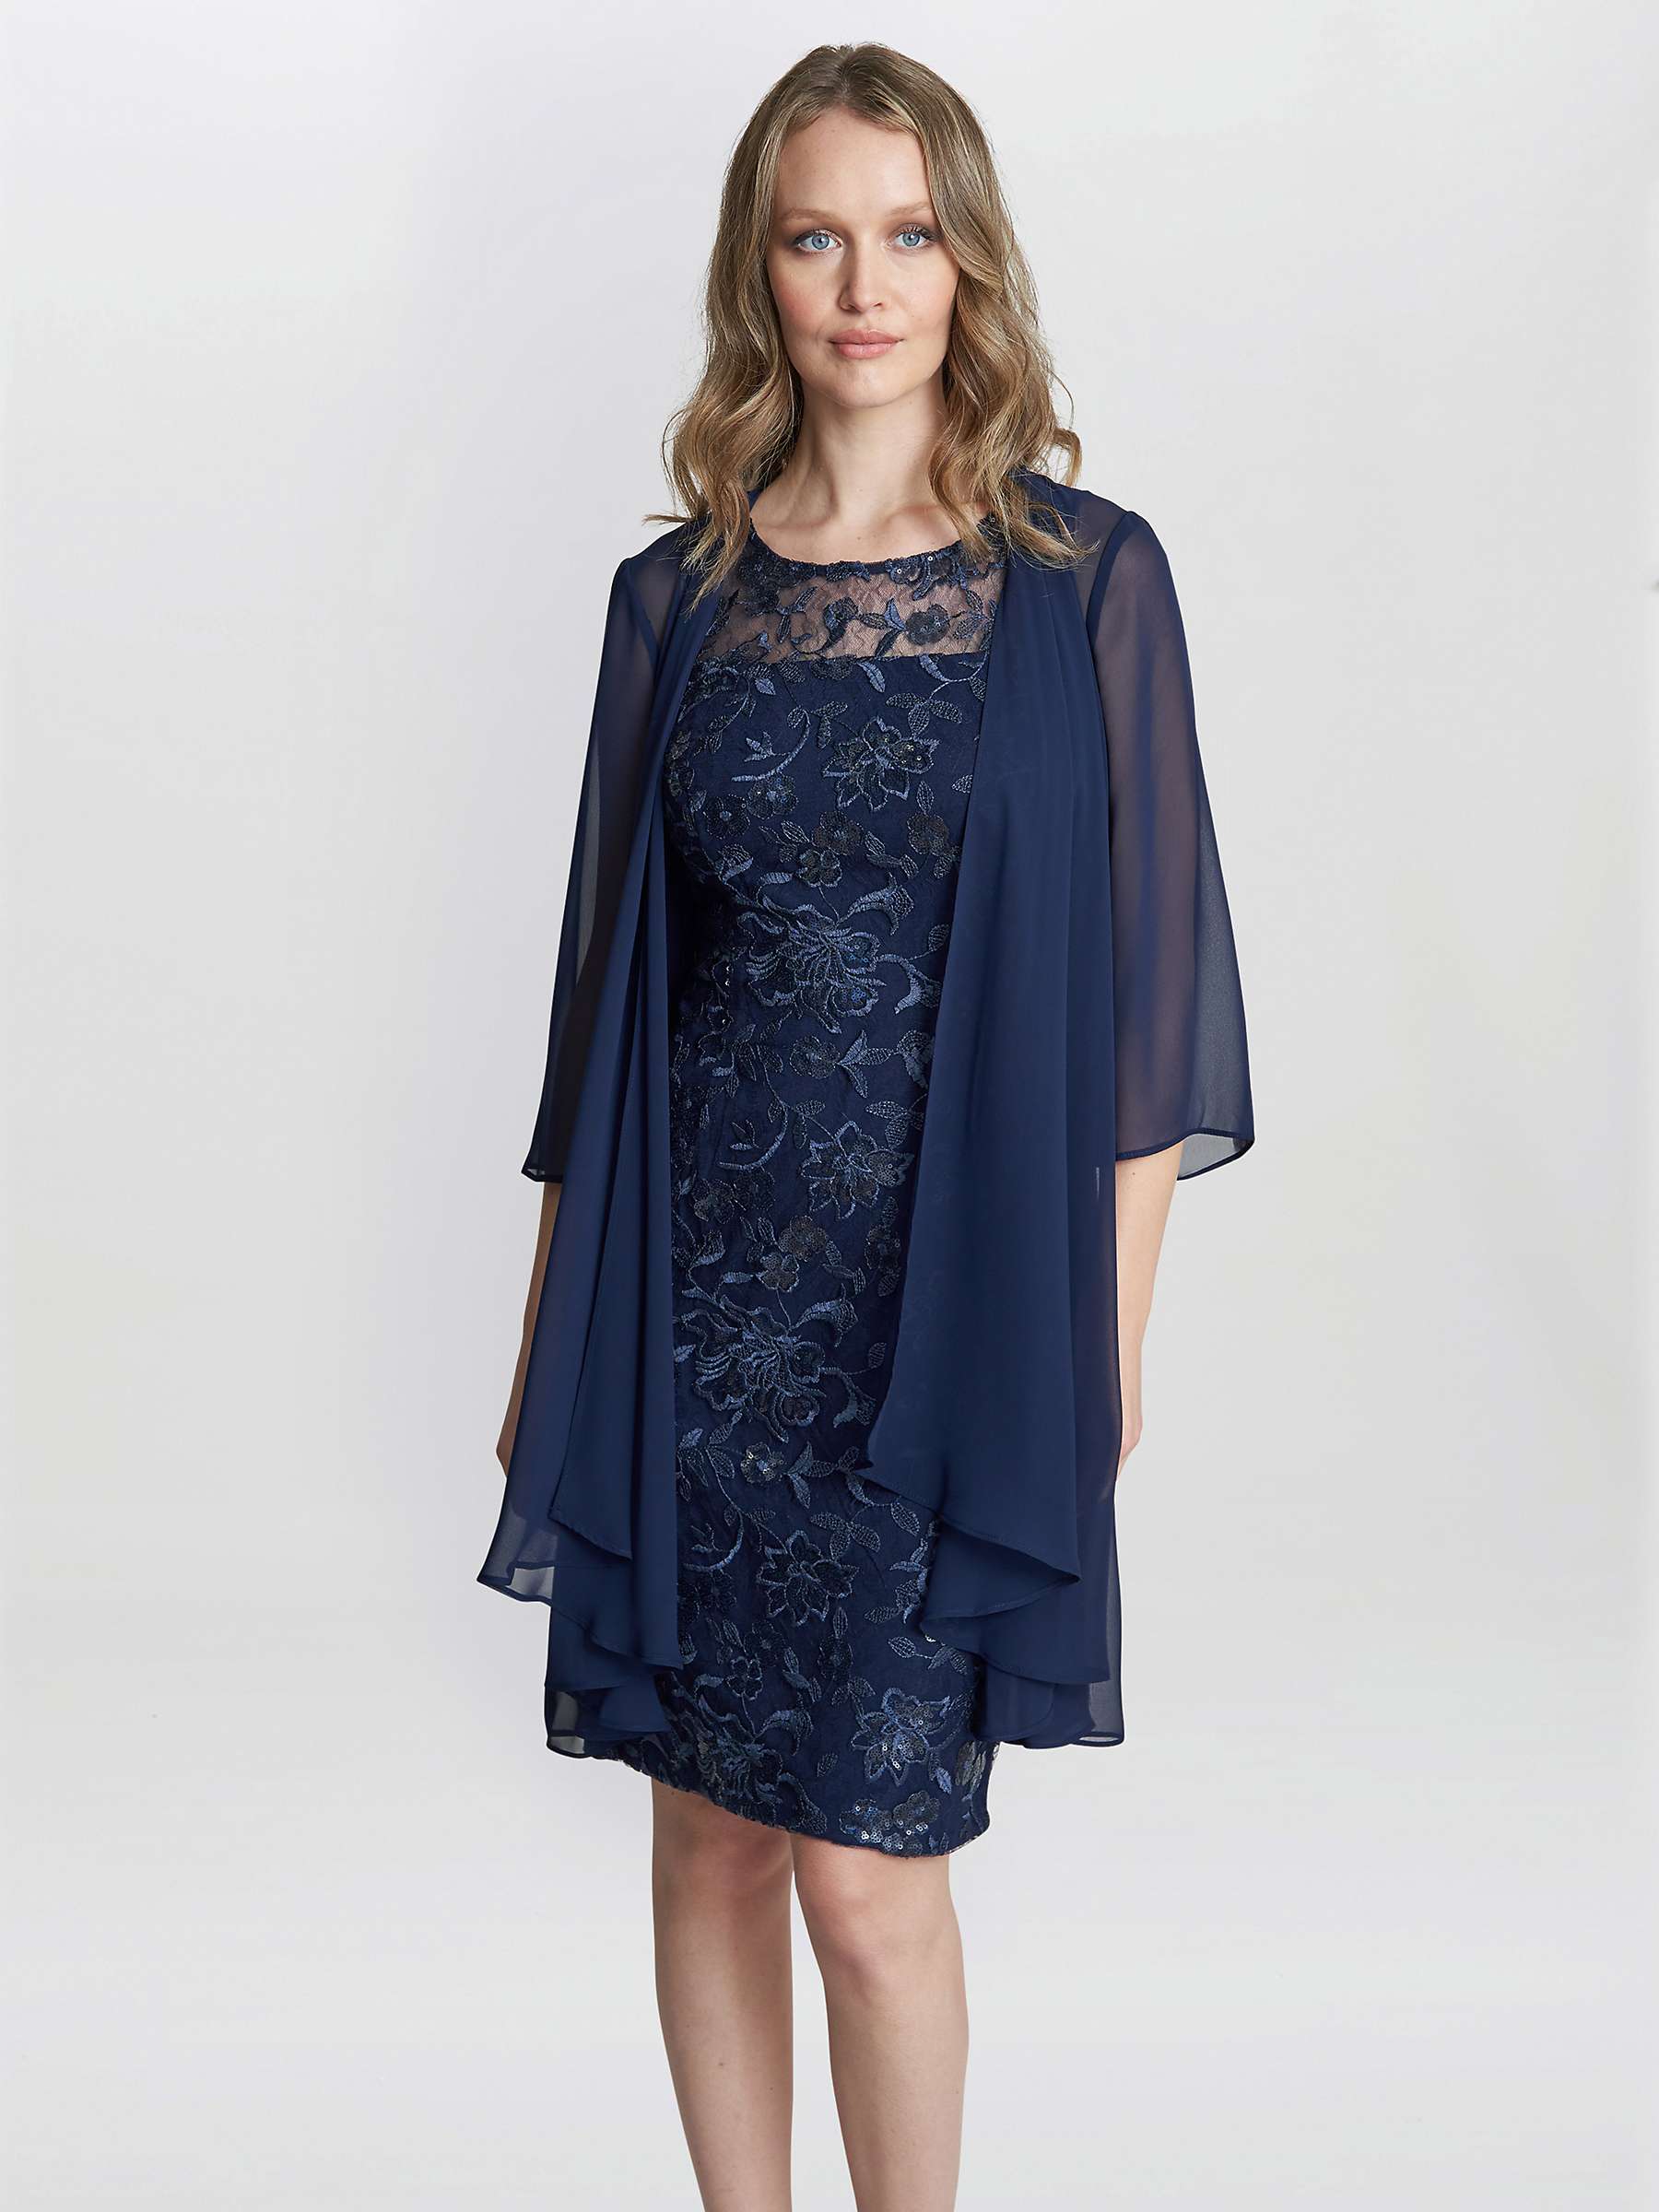 Buy Gina Bacconi Hayley Embroidered Dress with Chiffon Jacket, Spring Navy Online at johnlewis.com